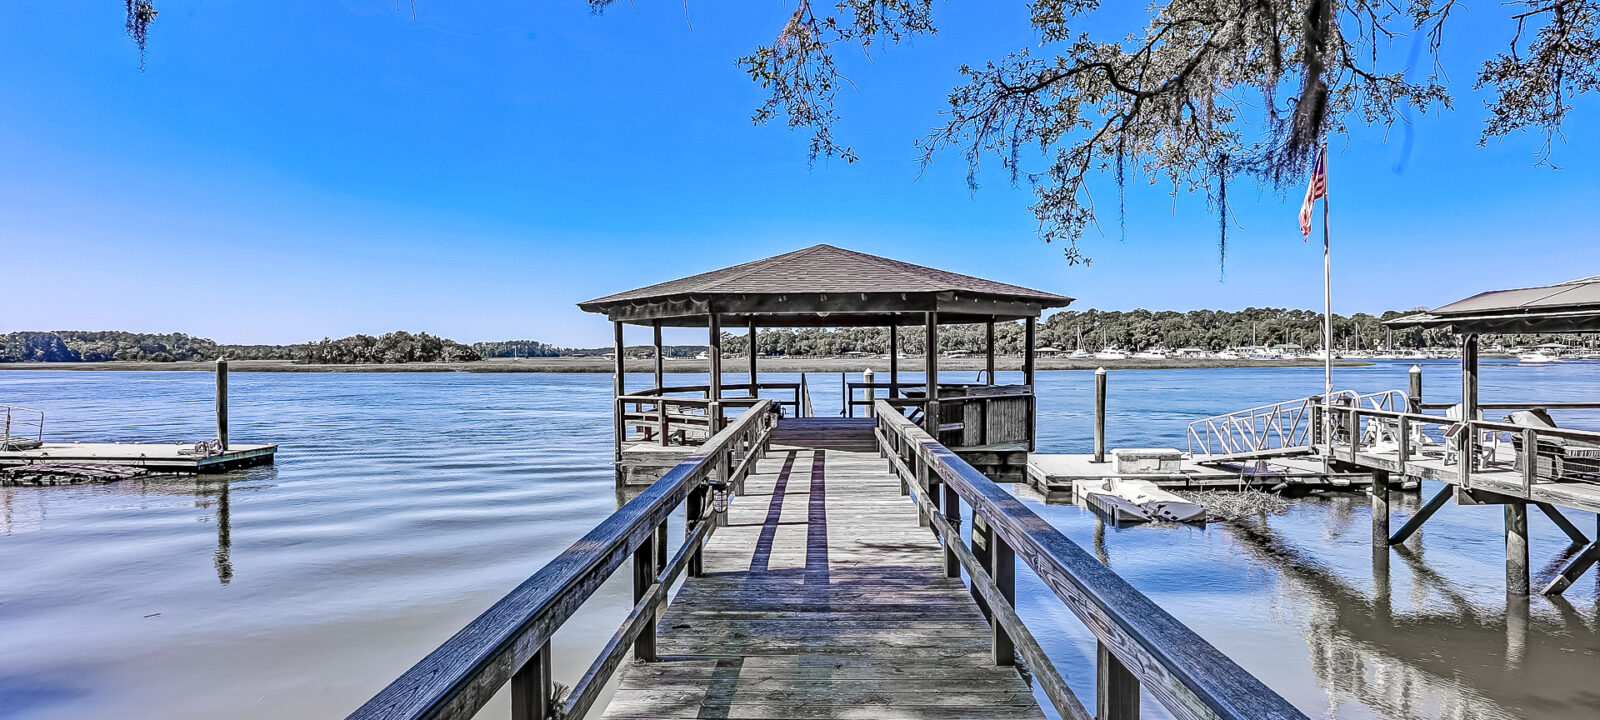 Waterfront dock with covered pier head